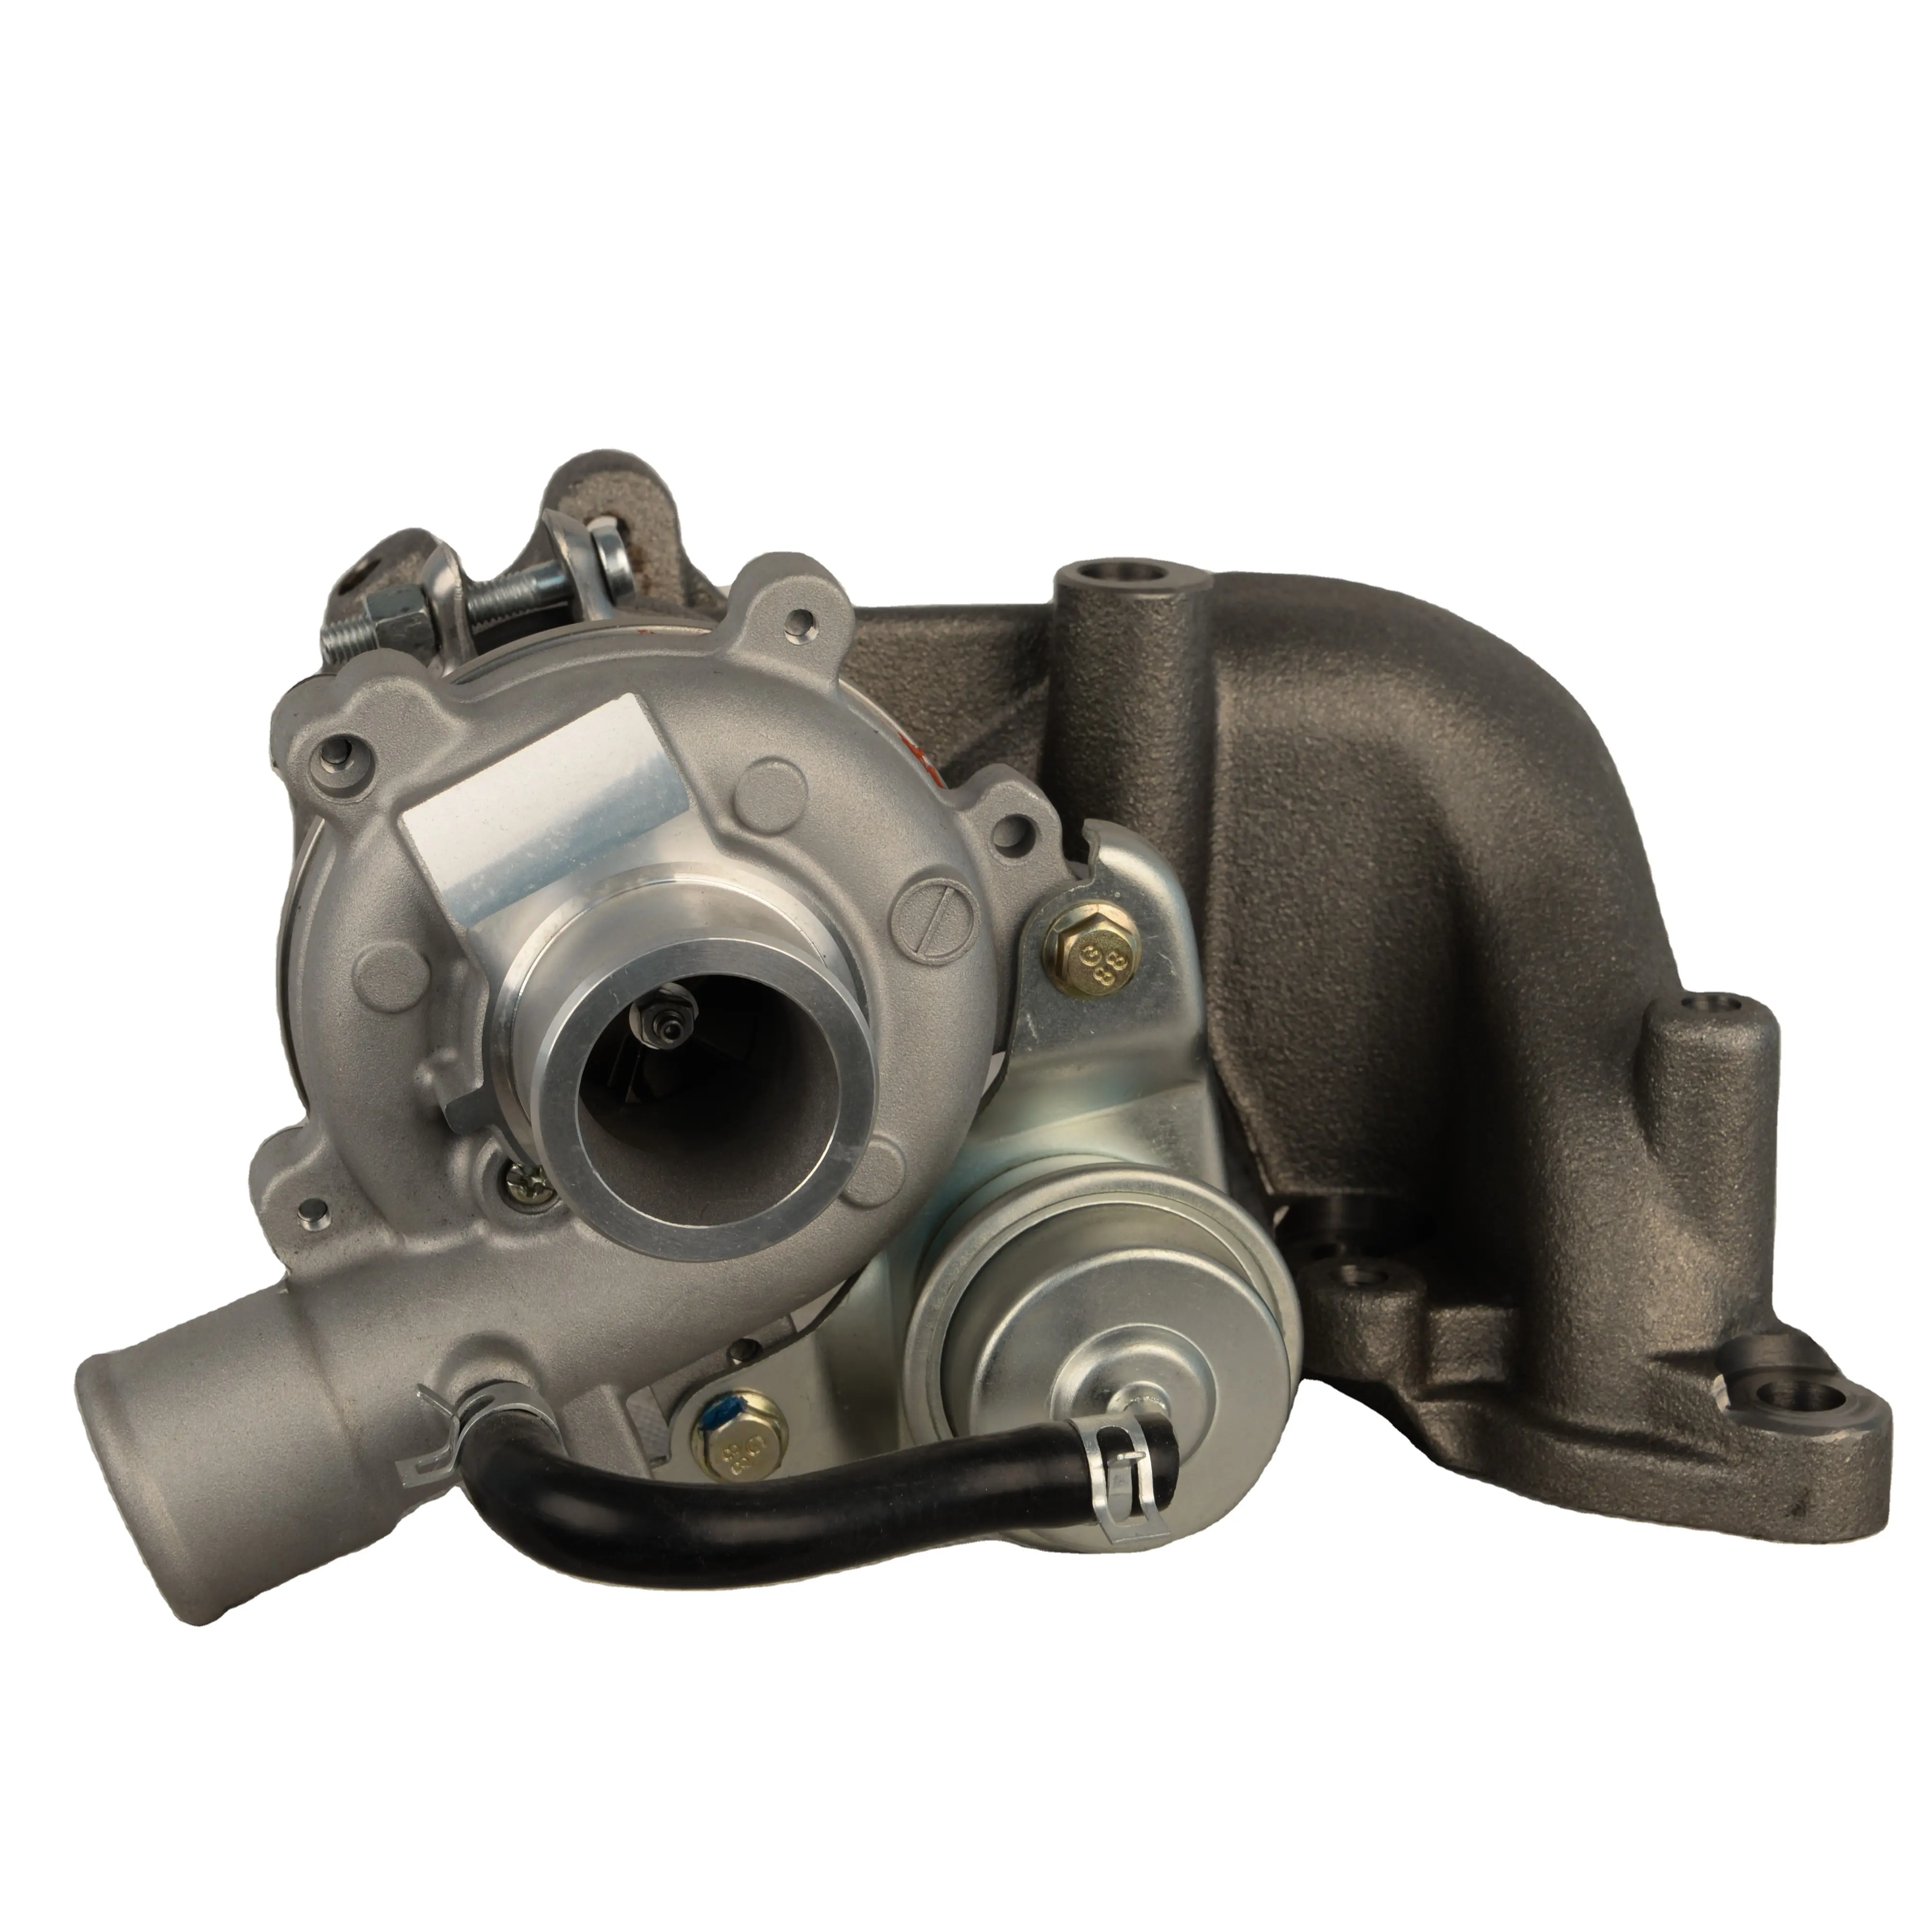 High Performance CT2 / CT9 Turbocharger 17201-30130 33020 turbo kits for 1ND-TV / W17/ NLP20 Engine